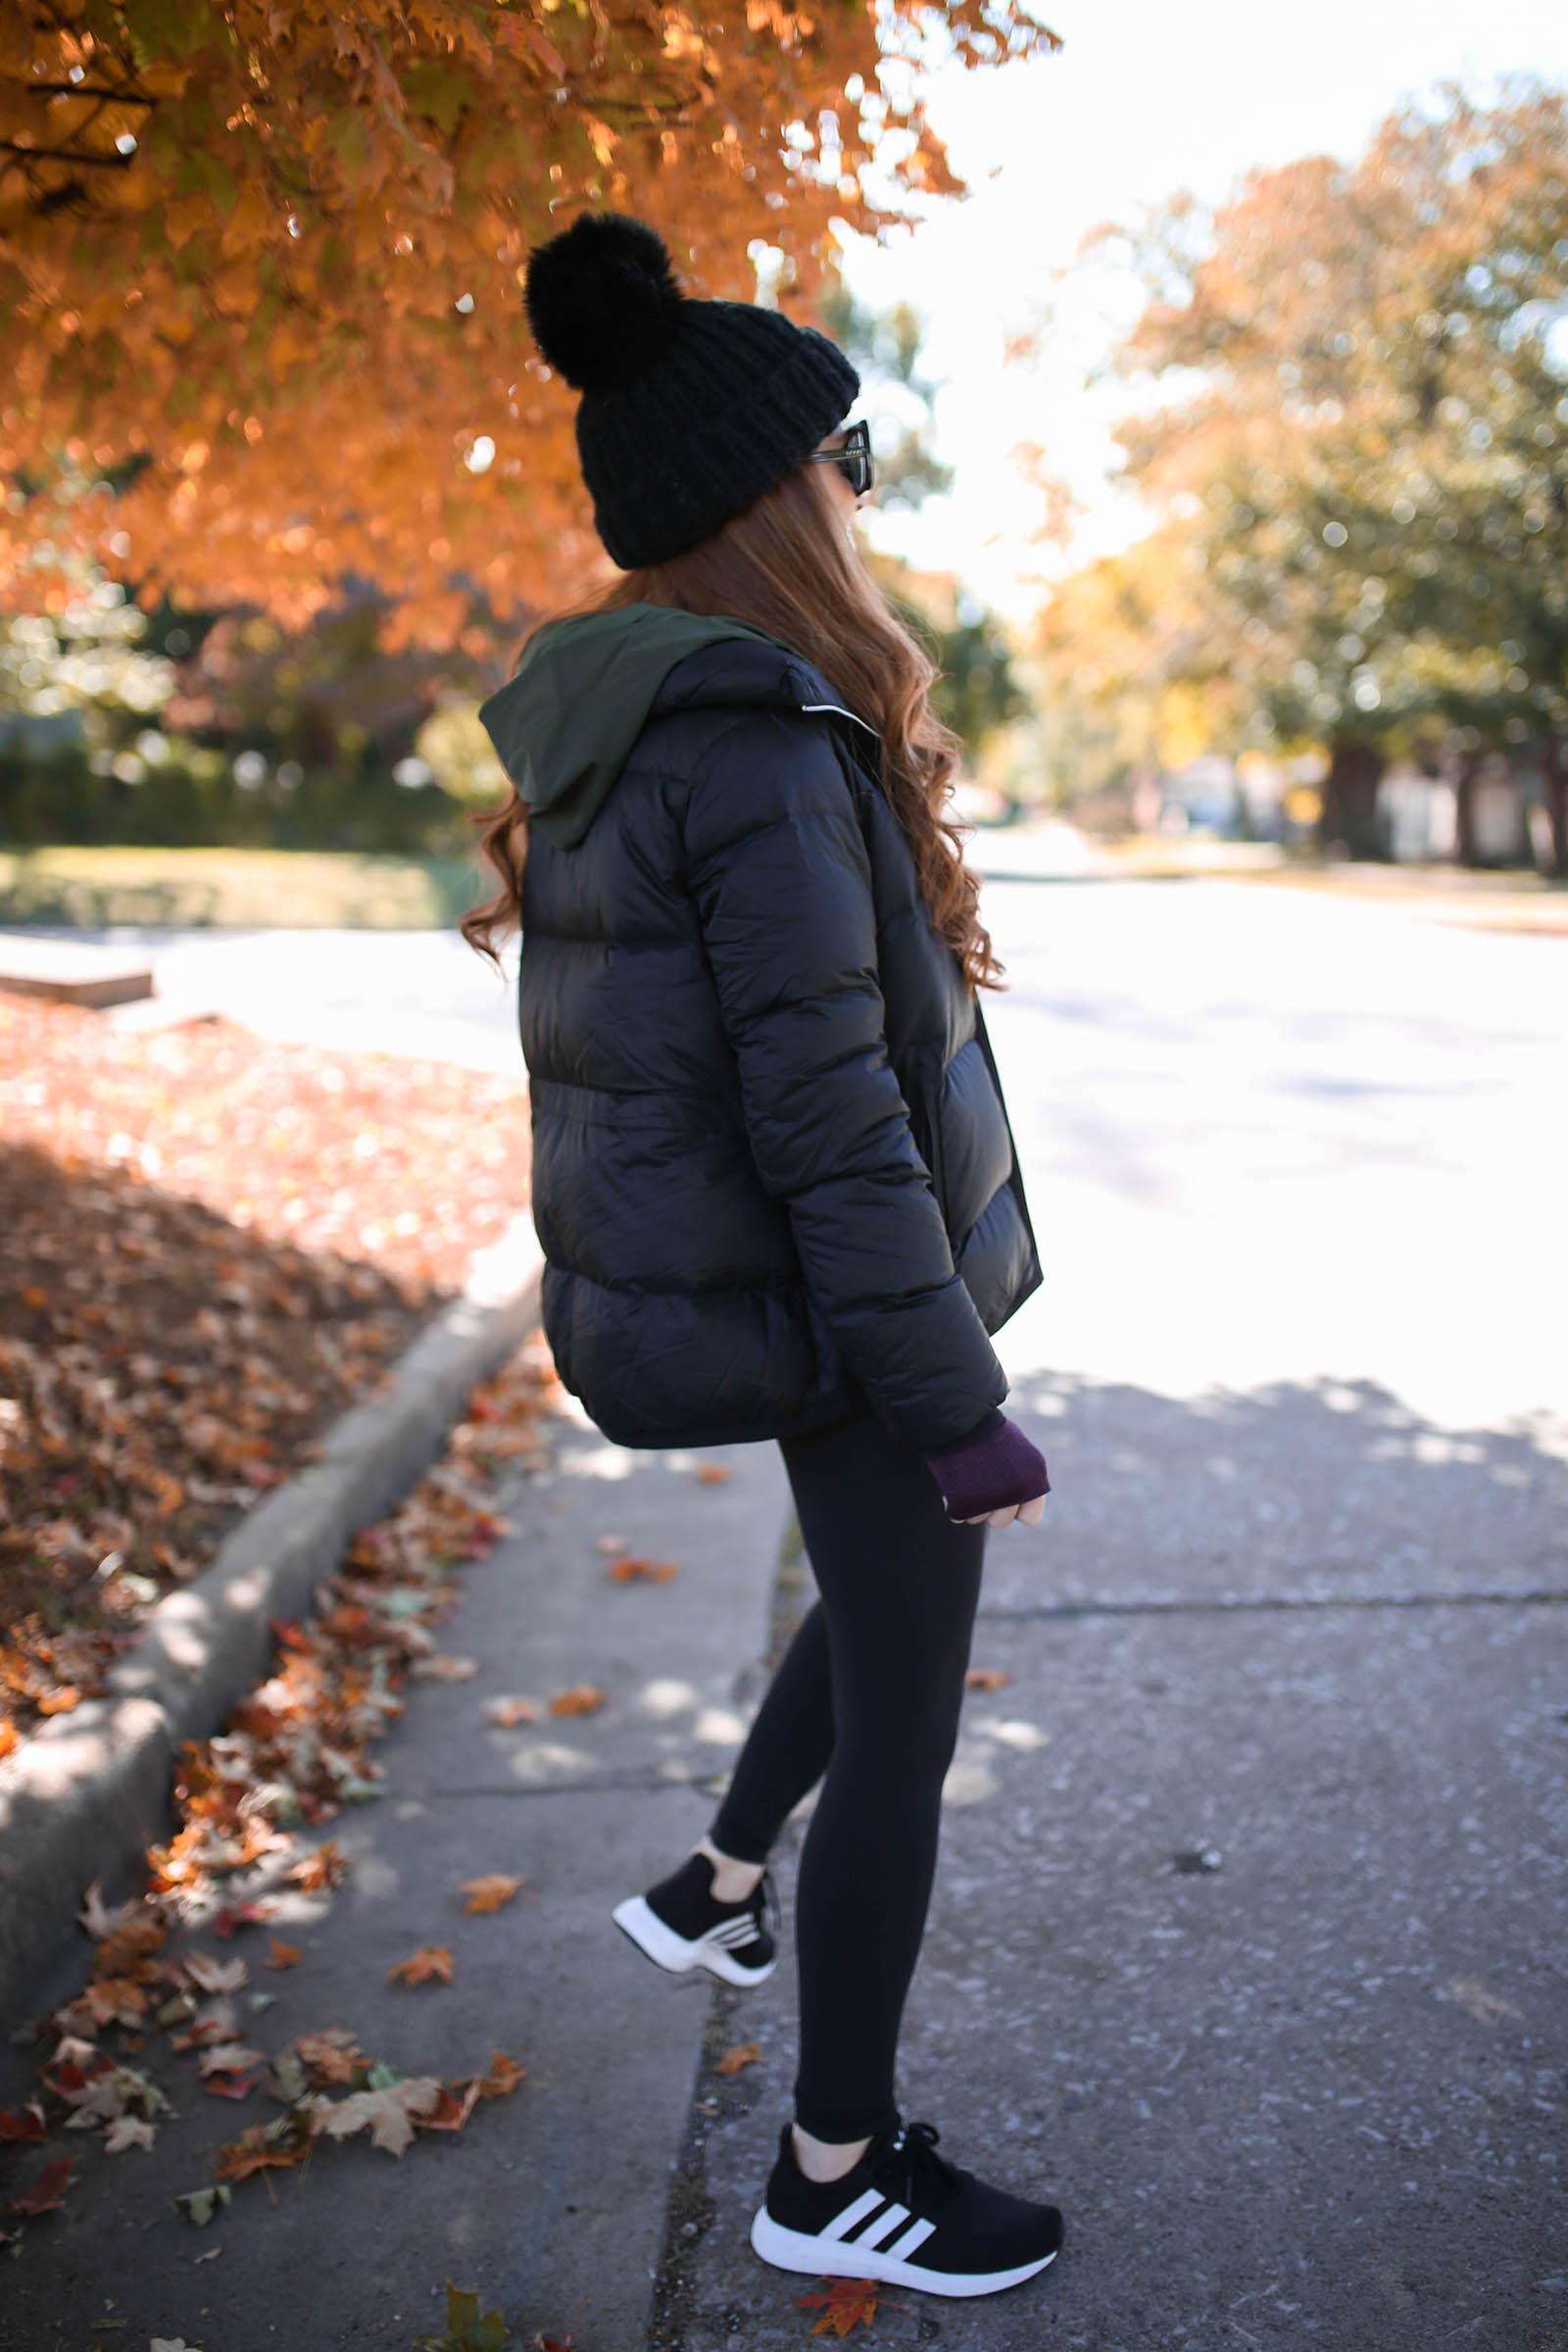 Fall Outerwear with lululemon - Jimmy Choos & Tennis Shoes